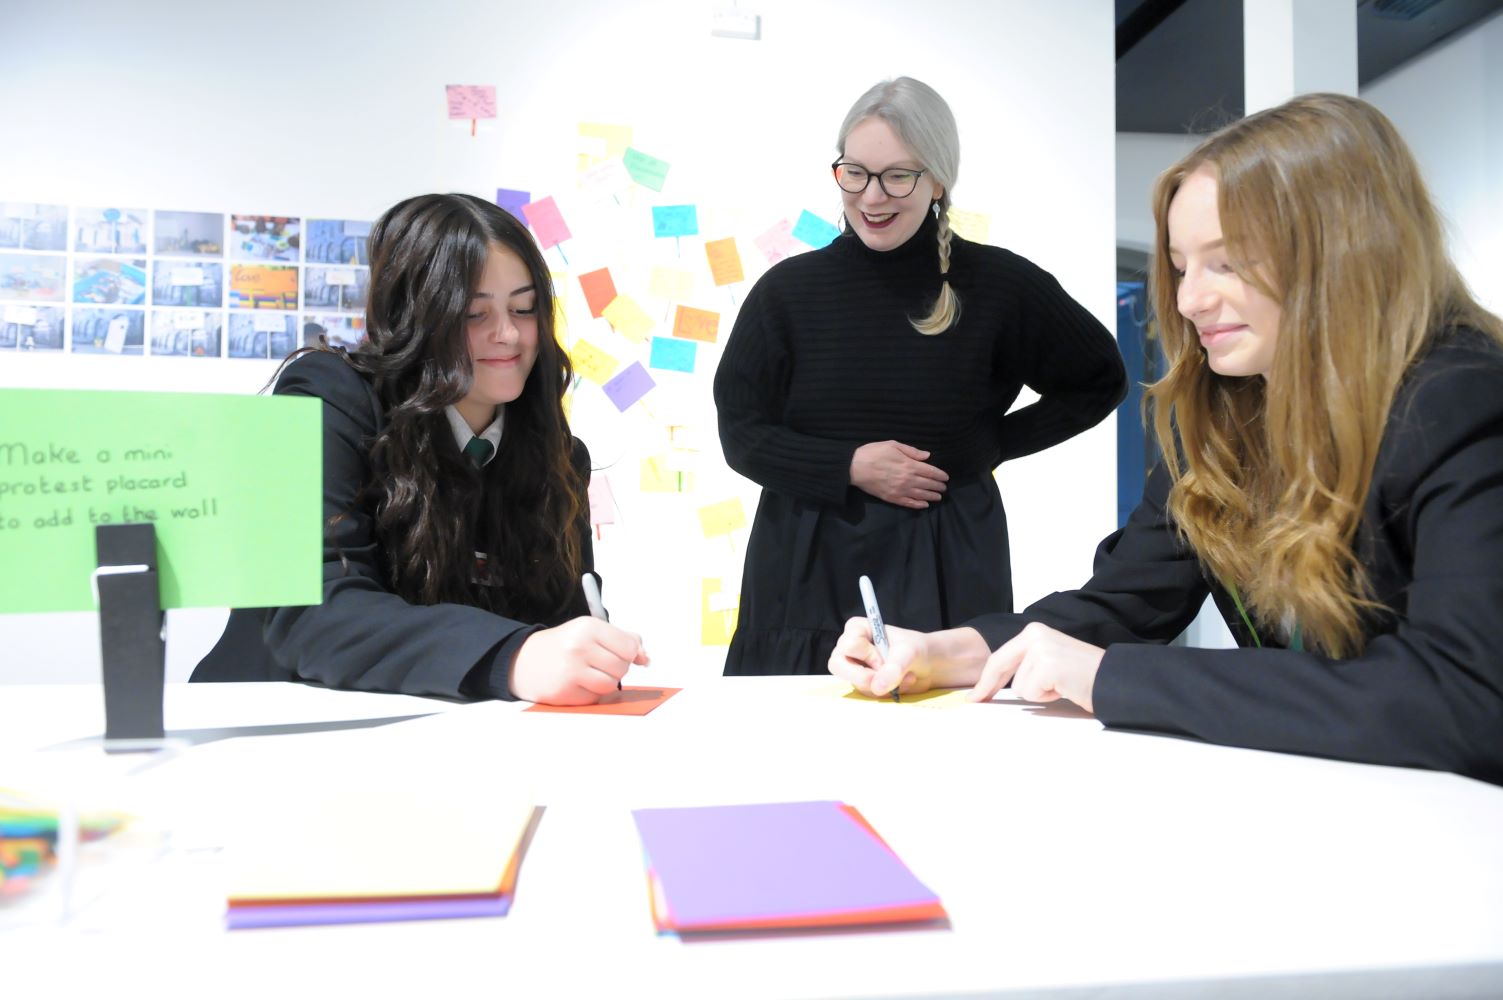 Two teenagers sit writing on post-it notes at a desk at the National Justice Museum in Nottingham. A member of museum staff stands in the background smiling.